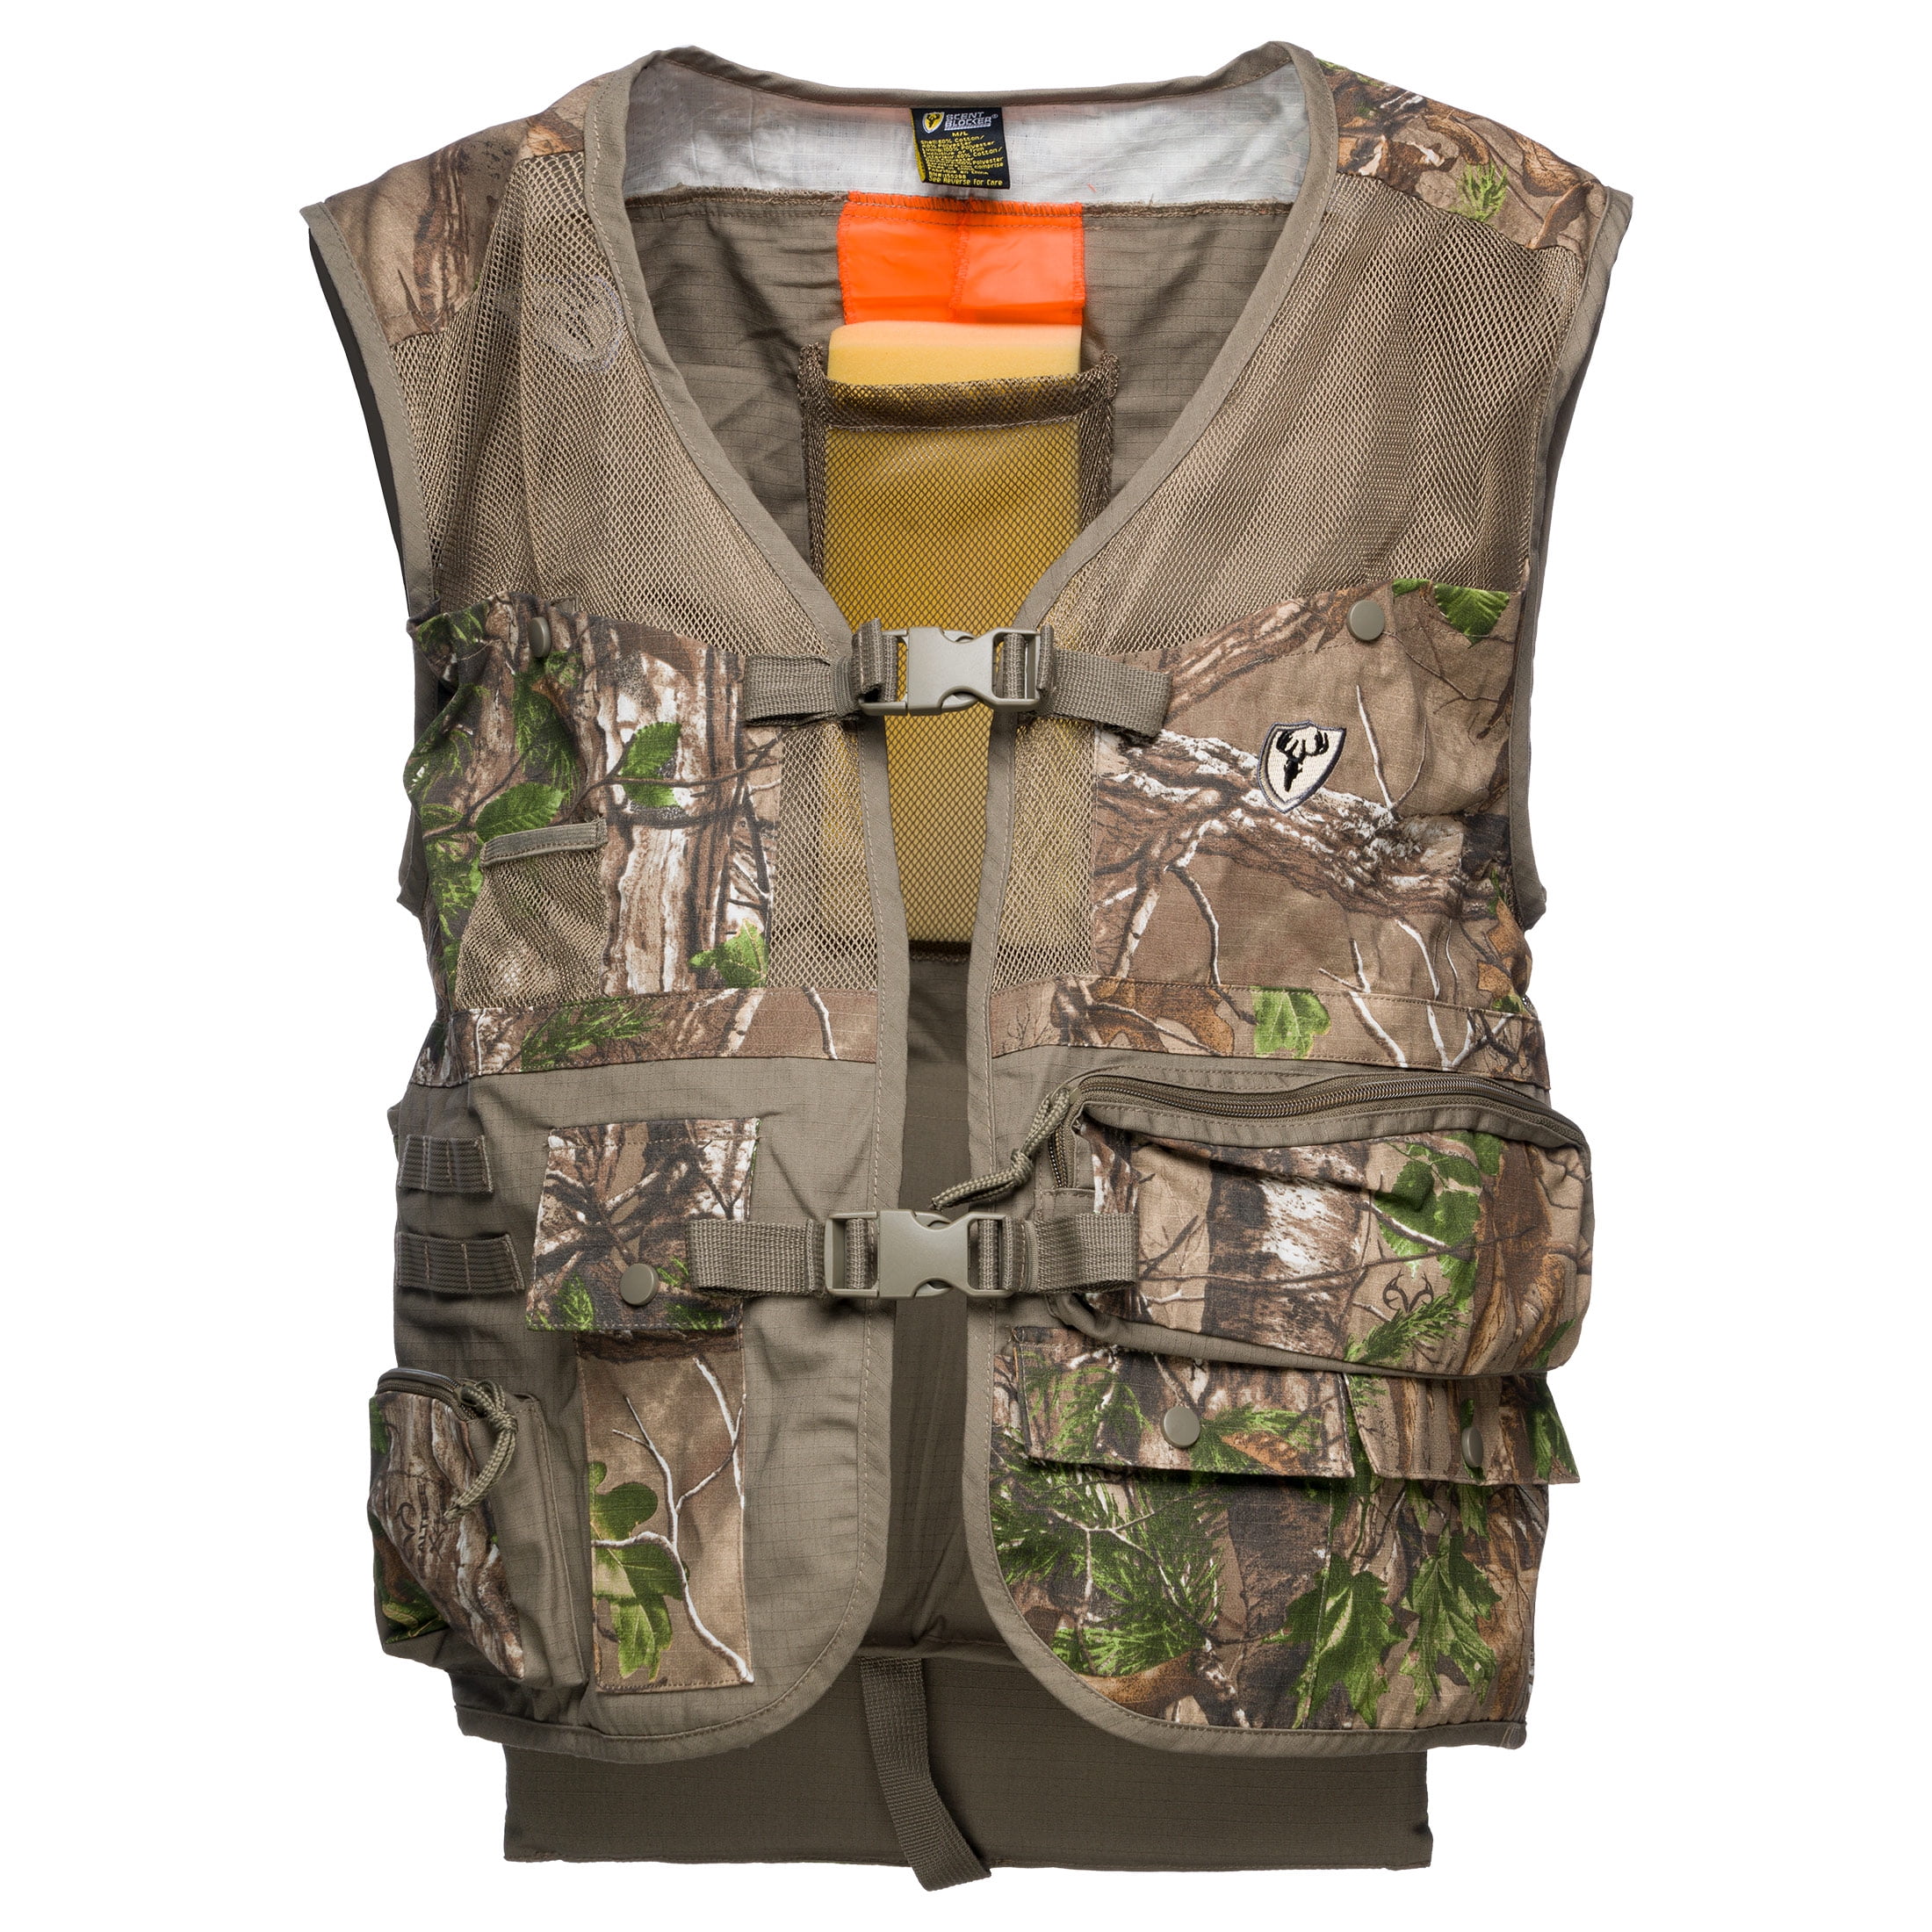 Men's Camo Turkey Vest with Cushioned Seat-LARGE-XL-46/48 